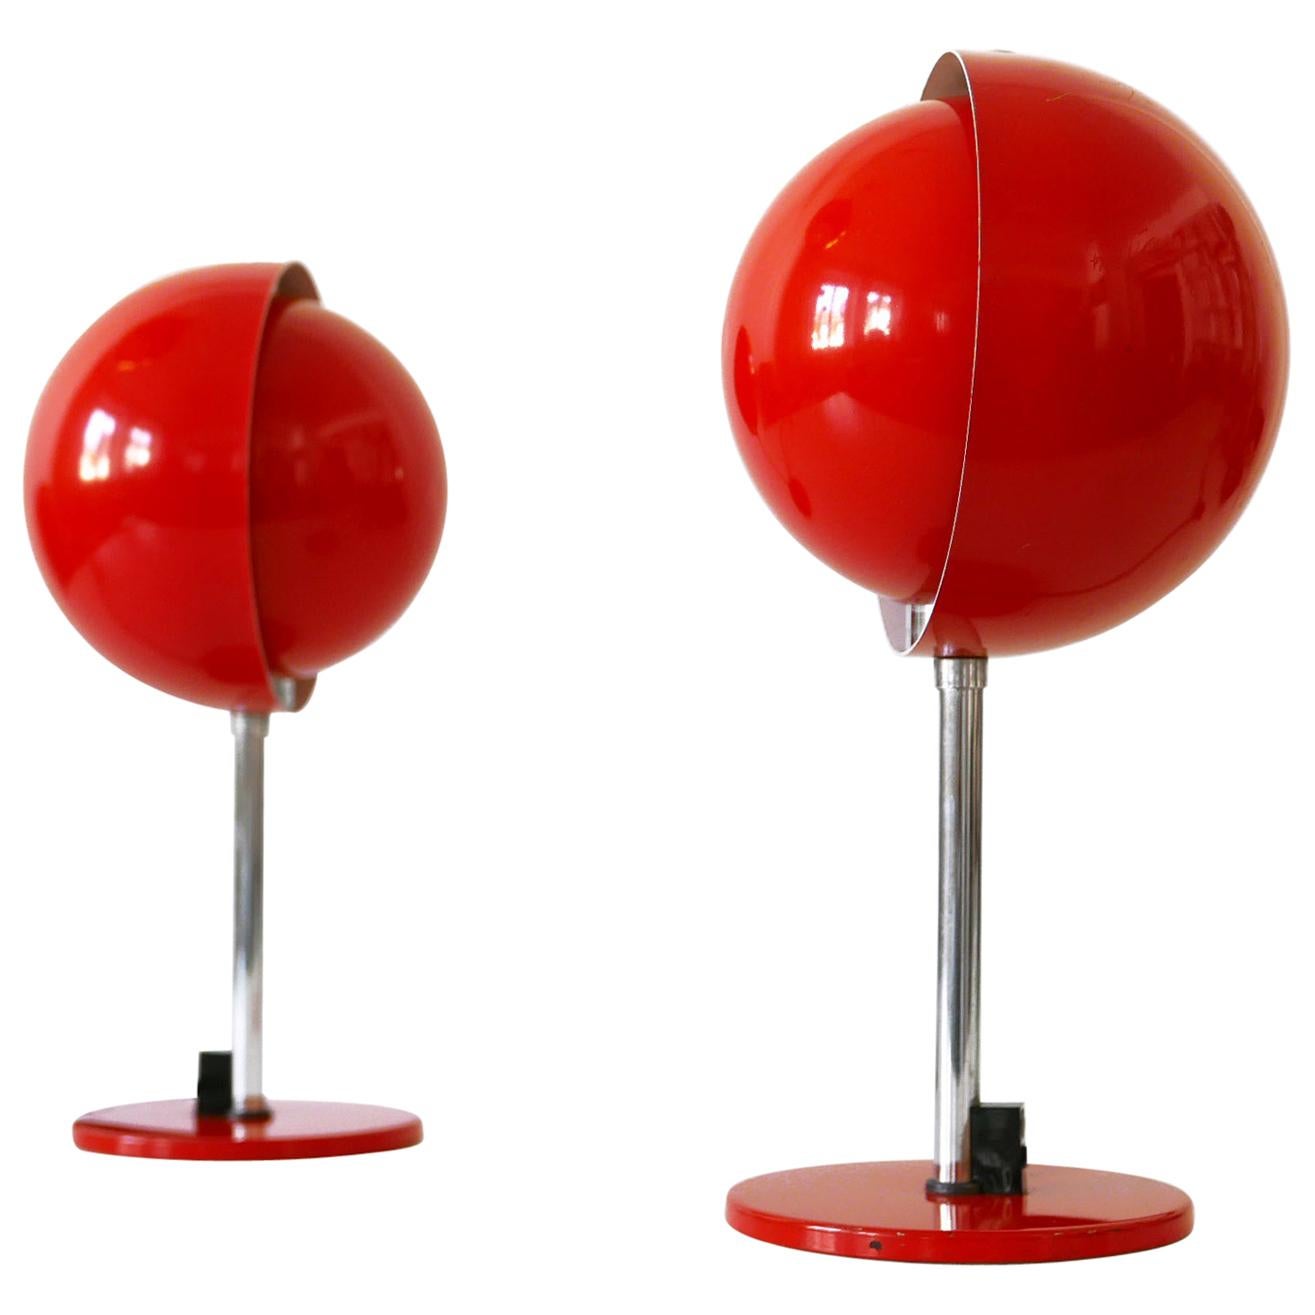 Set of Two Mid-Century Modern Moon Table Lamps by Hustadt-Leuchten 1960s Germany